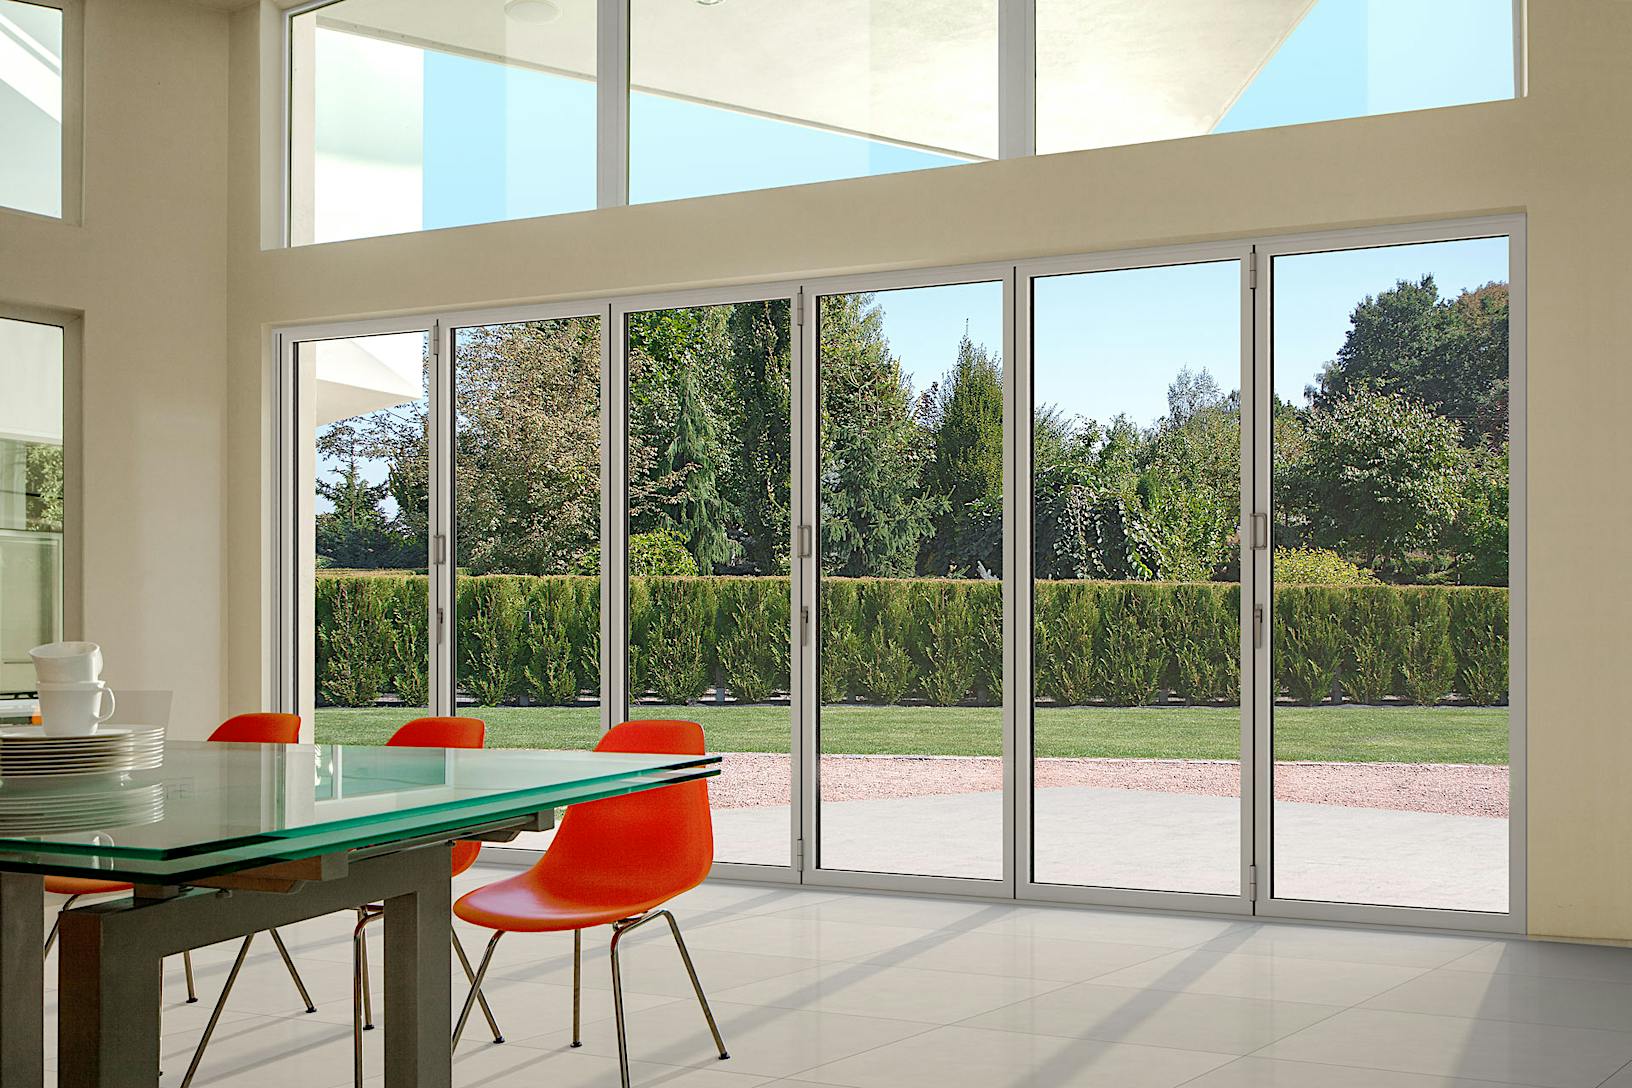 NW Aluminum 640 dining room kitchen - closed glass doors